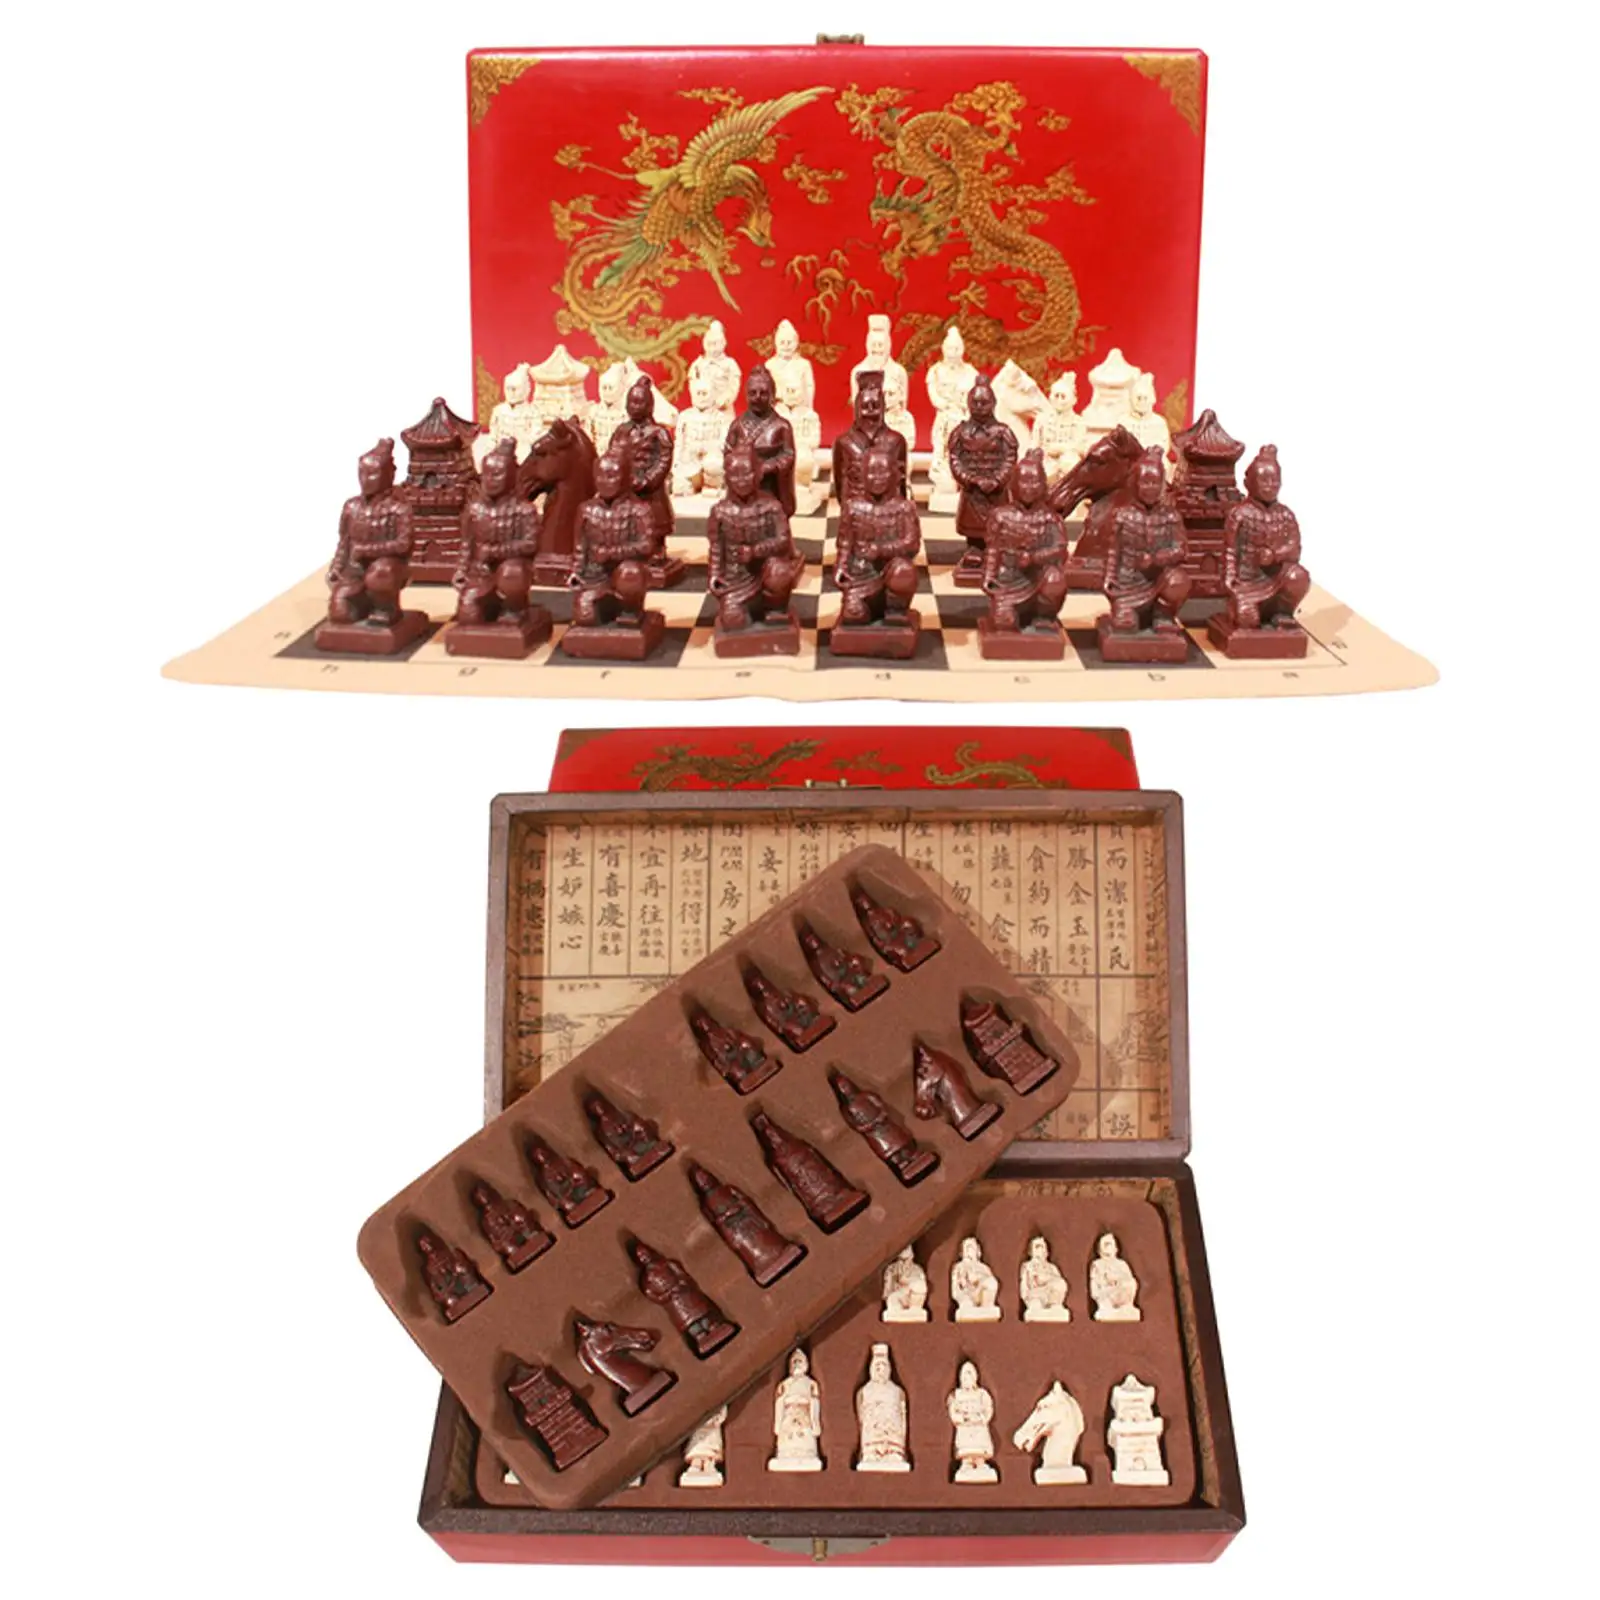 

Qin Bing Figures International Chess Set Hand Carved Chess Pieces for Entertainment Board Game Indoor Outdoor Novelty Gifts